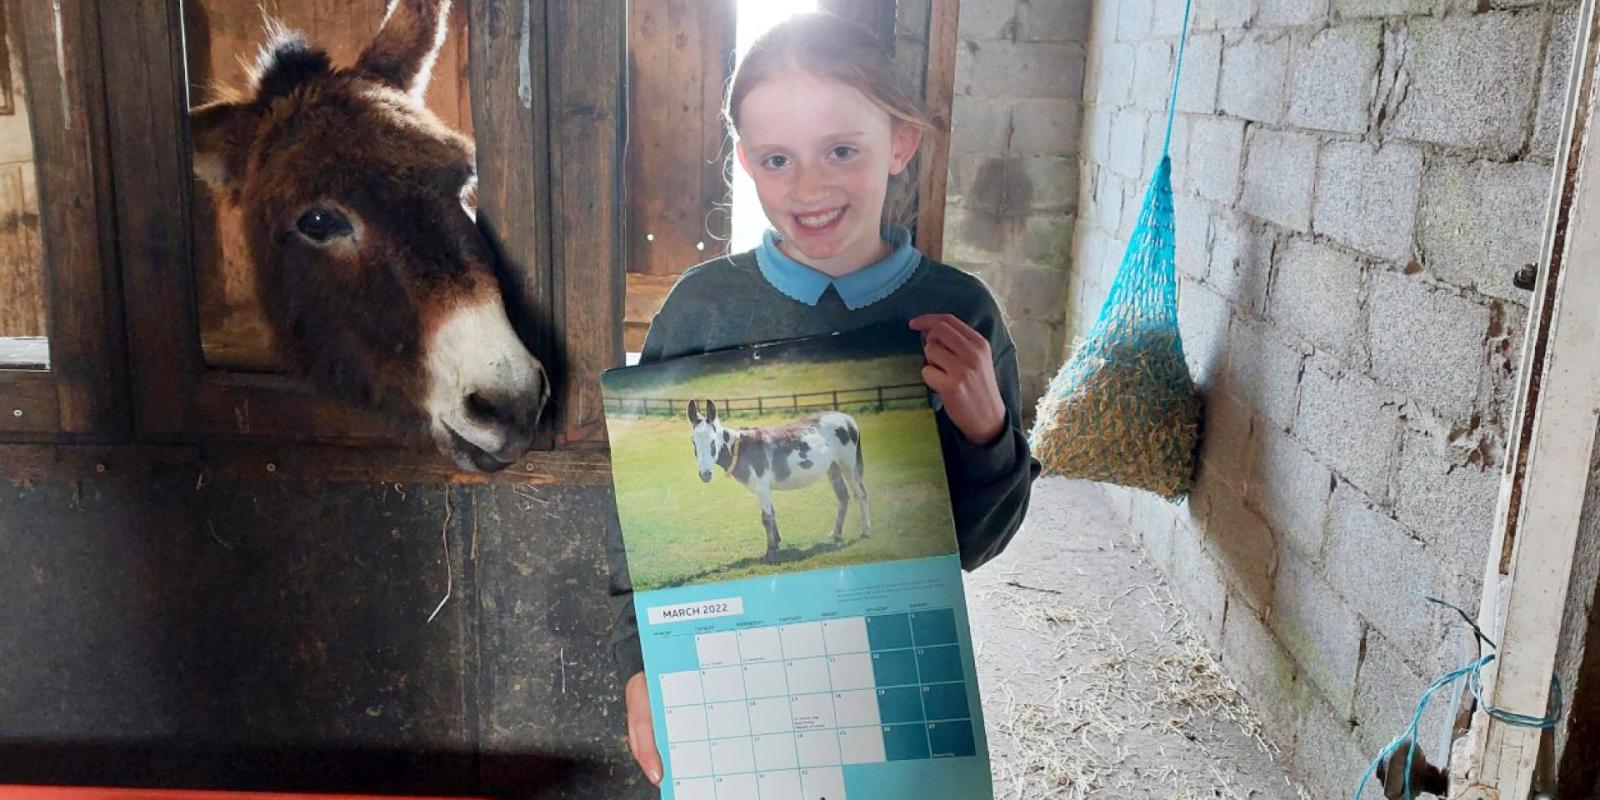 June in Sid and Sal's shed with her calendar